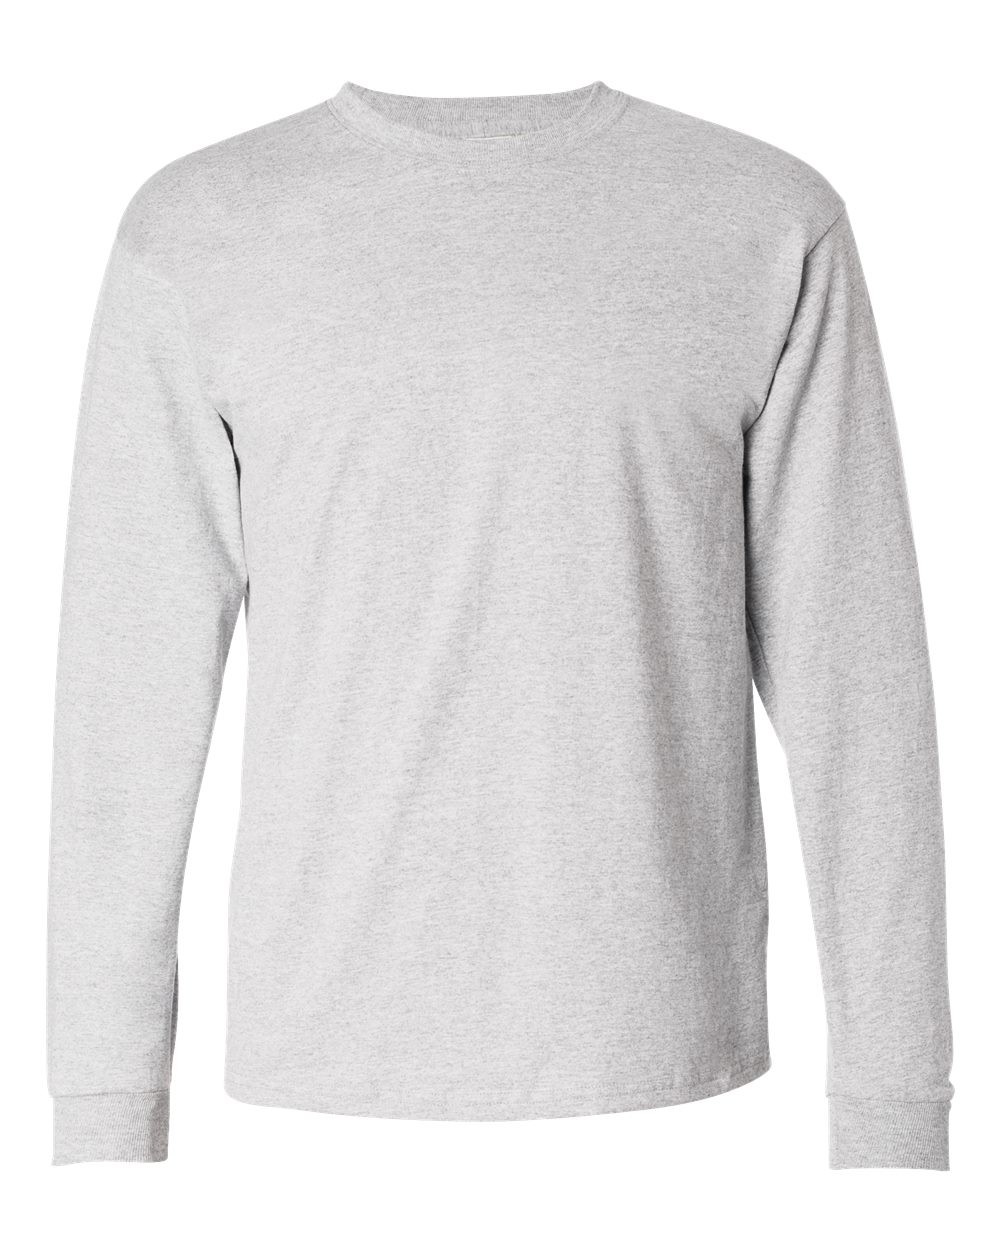 Hanes 5586 - Adult Authentic Long-Sleeve T-Shirt